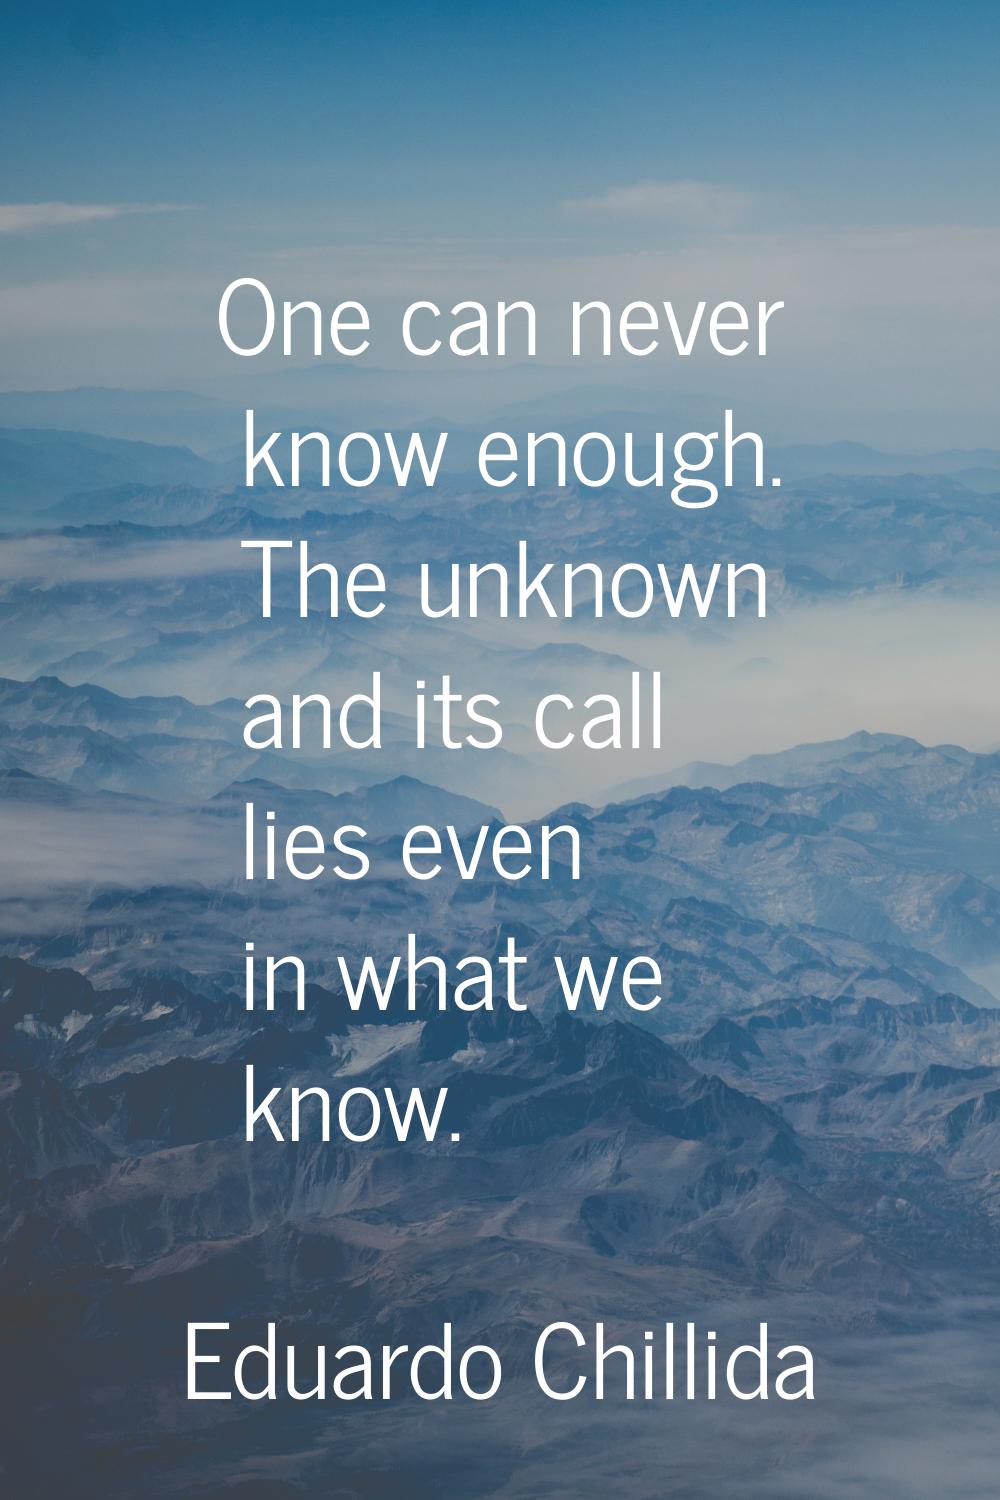 One can never know enough. The unknown and its call lies even in what we know.